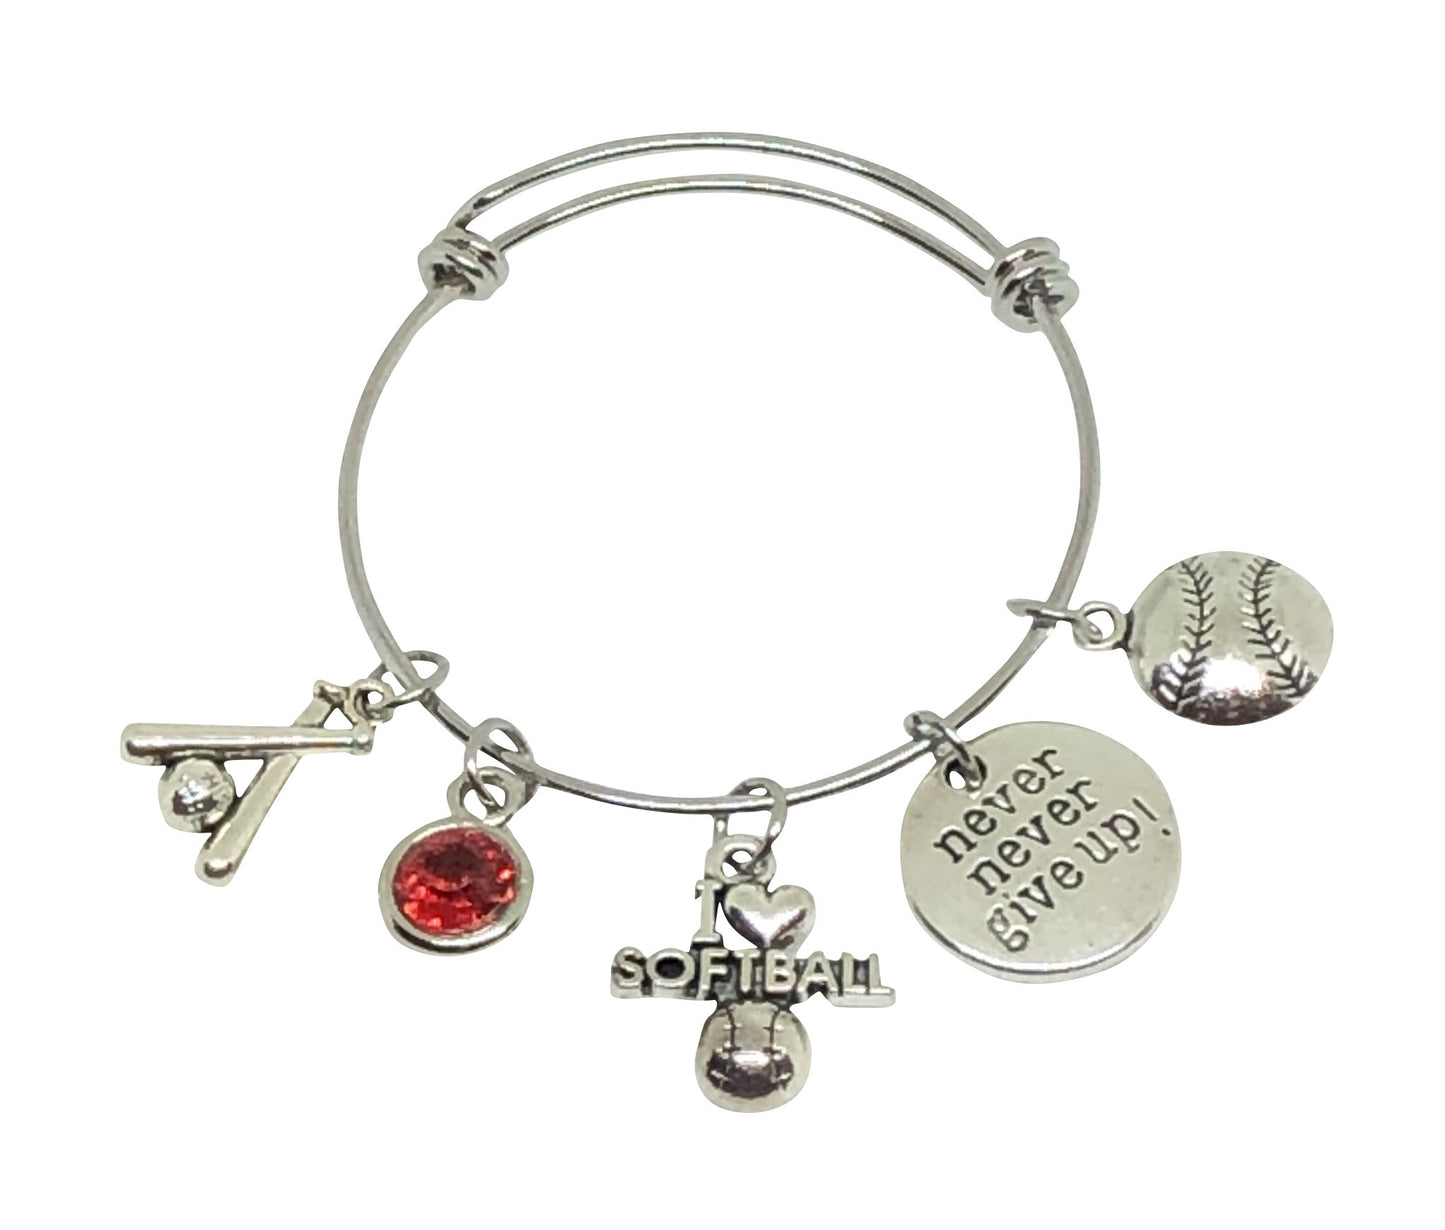 Softball Charm Bracelet Never Give Up! - Cheer and Dance On Demand